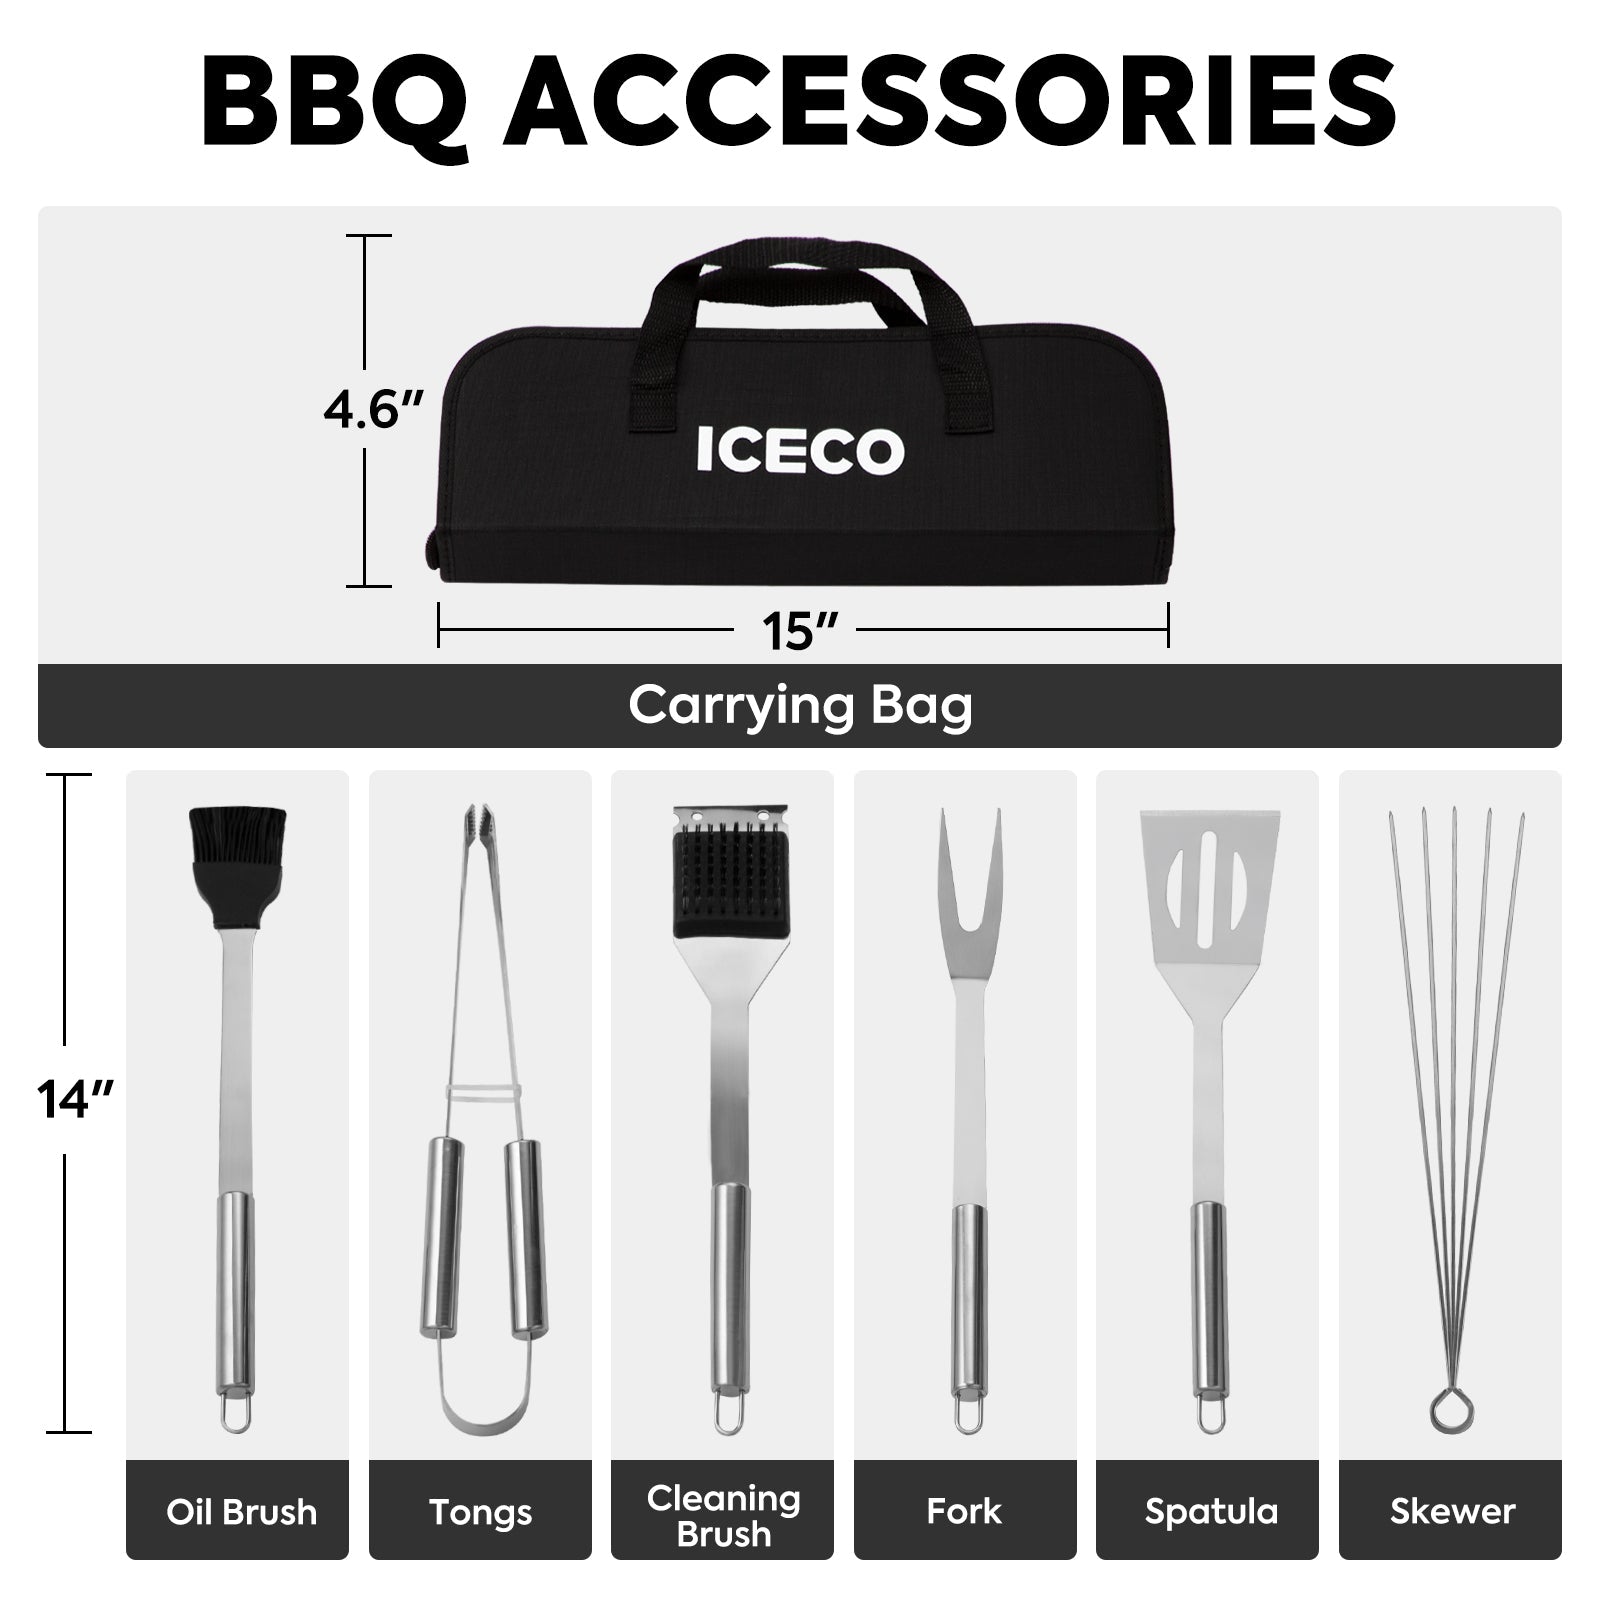 2 in 1 Charcoal Grill with BBQ Tool | ICECO, Grill